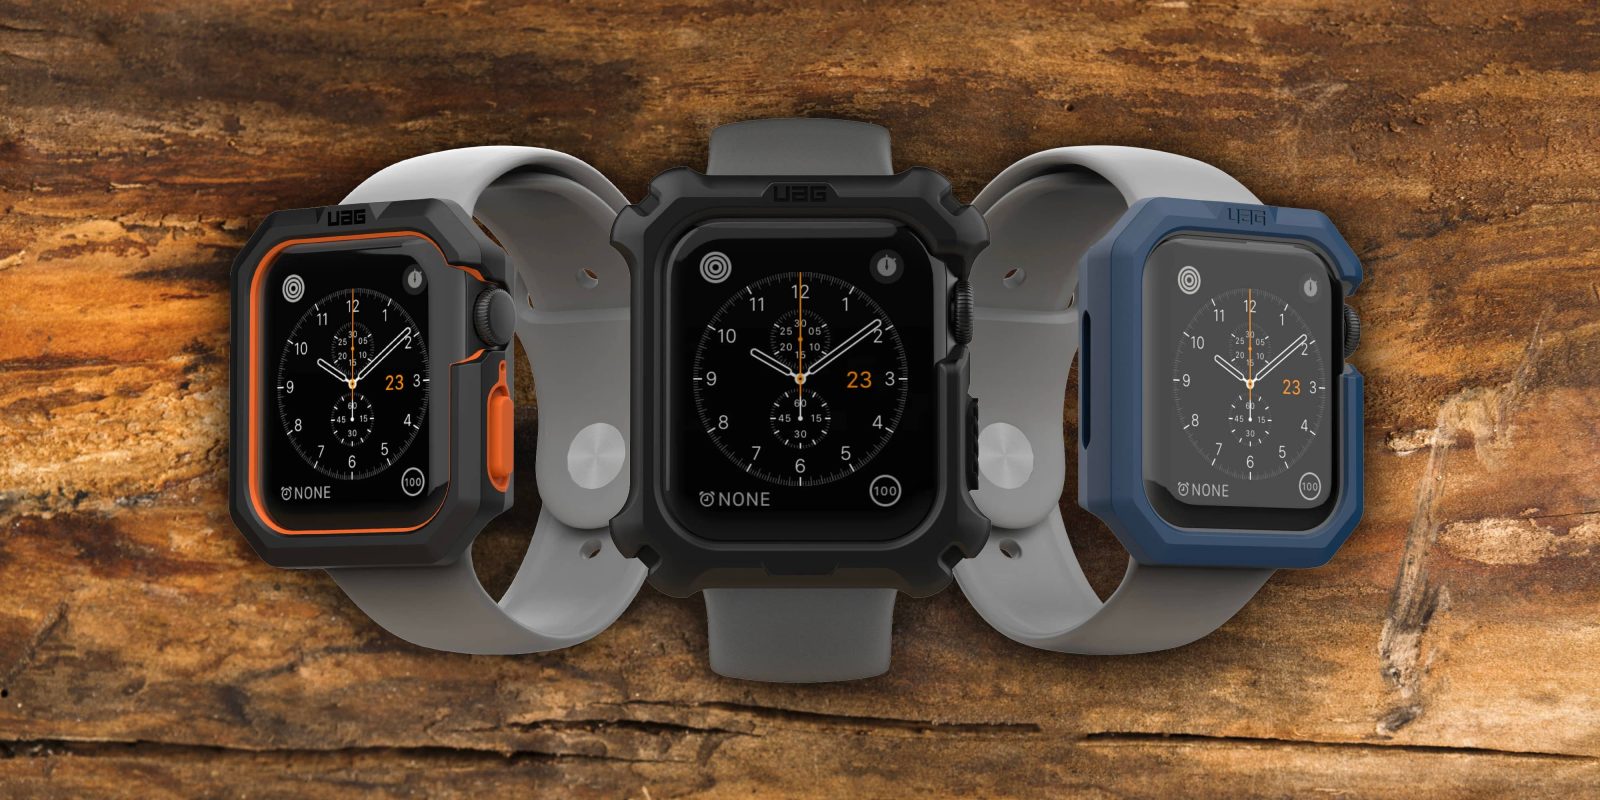 Rugged Apple Watch, would you buy one?